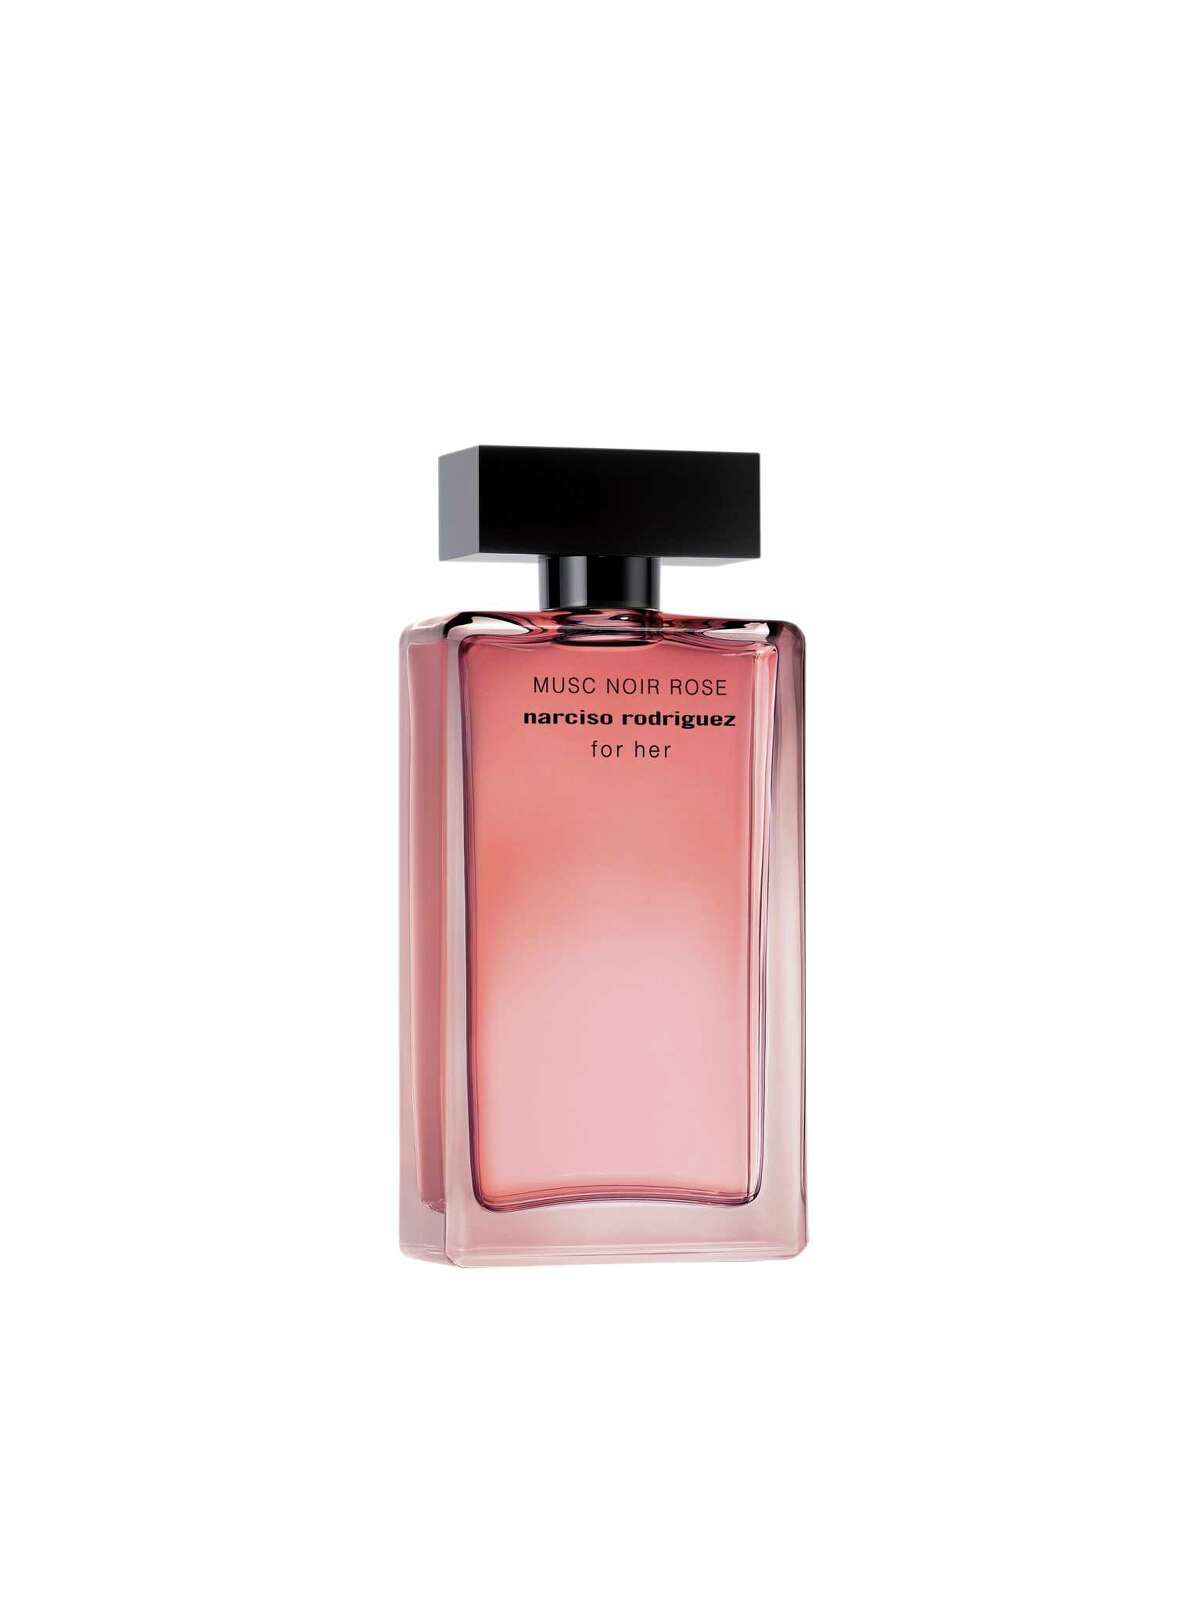 Narciso Rodriguez's new Musc Noir Rose offers intense tuberose blended with plum, pink pepper, spicy citrus, and herbal and balsamic notes.